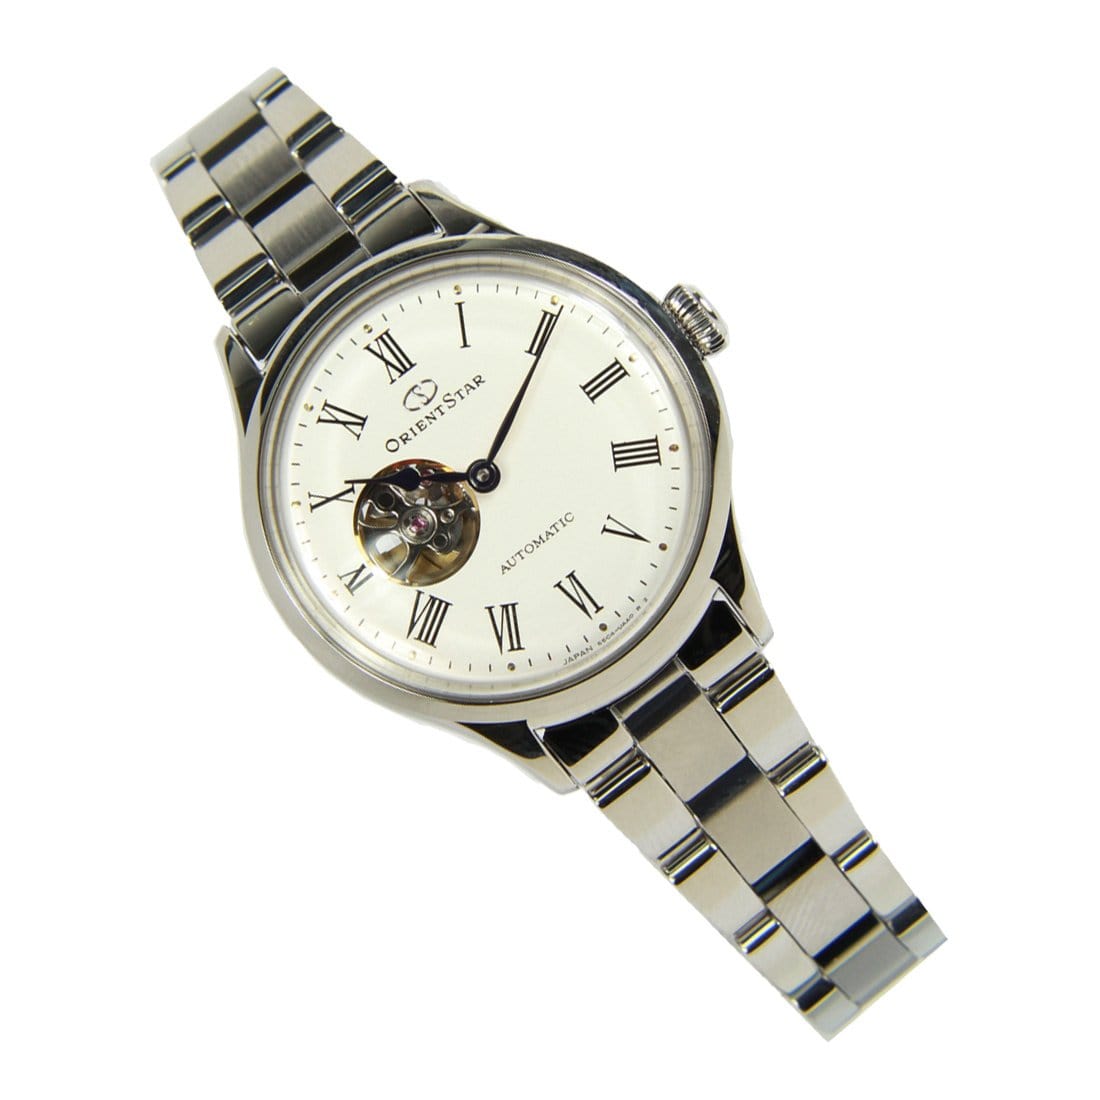 Orient Star Automatic 50M Analog Ladies Watch RE-ND0002S00B